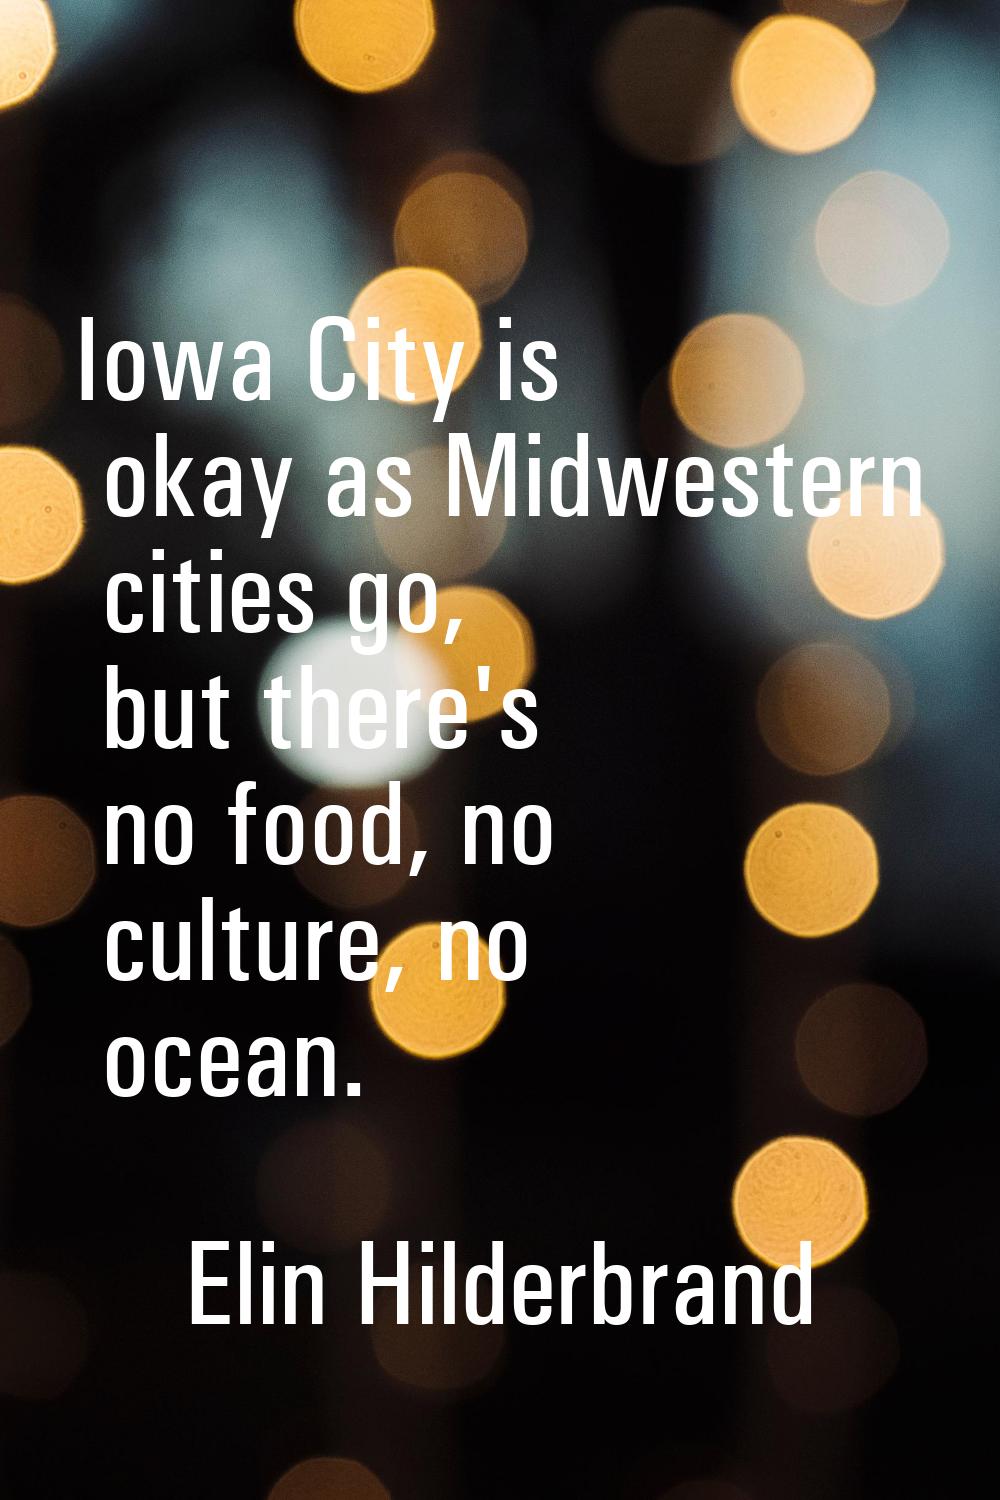 Iowa City is okay as Midwestern cities go, but there's no food, no culture, no ocean.